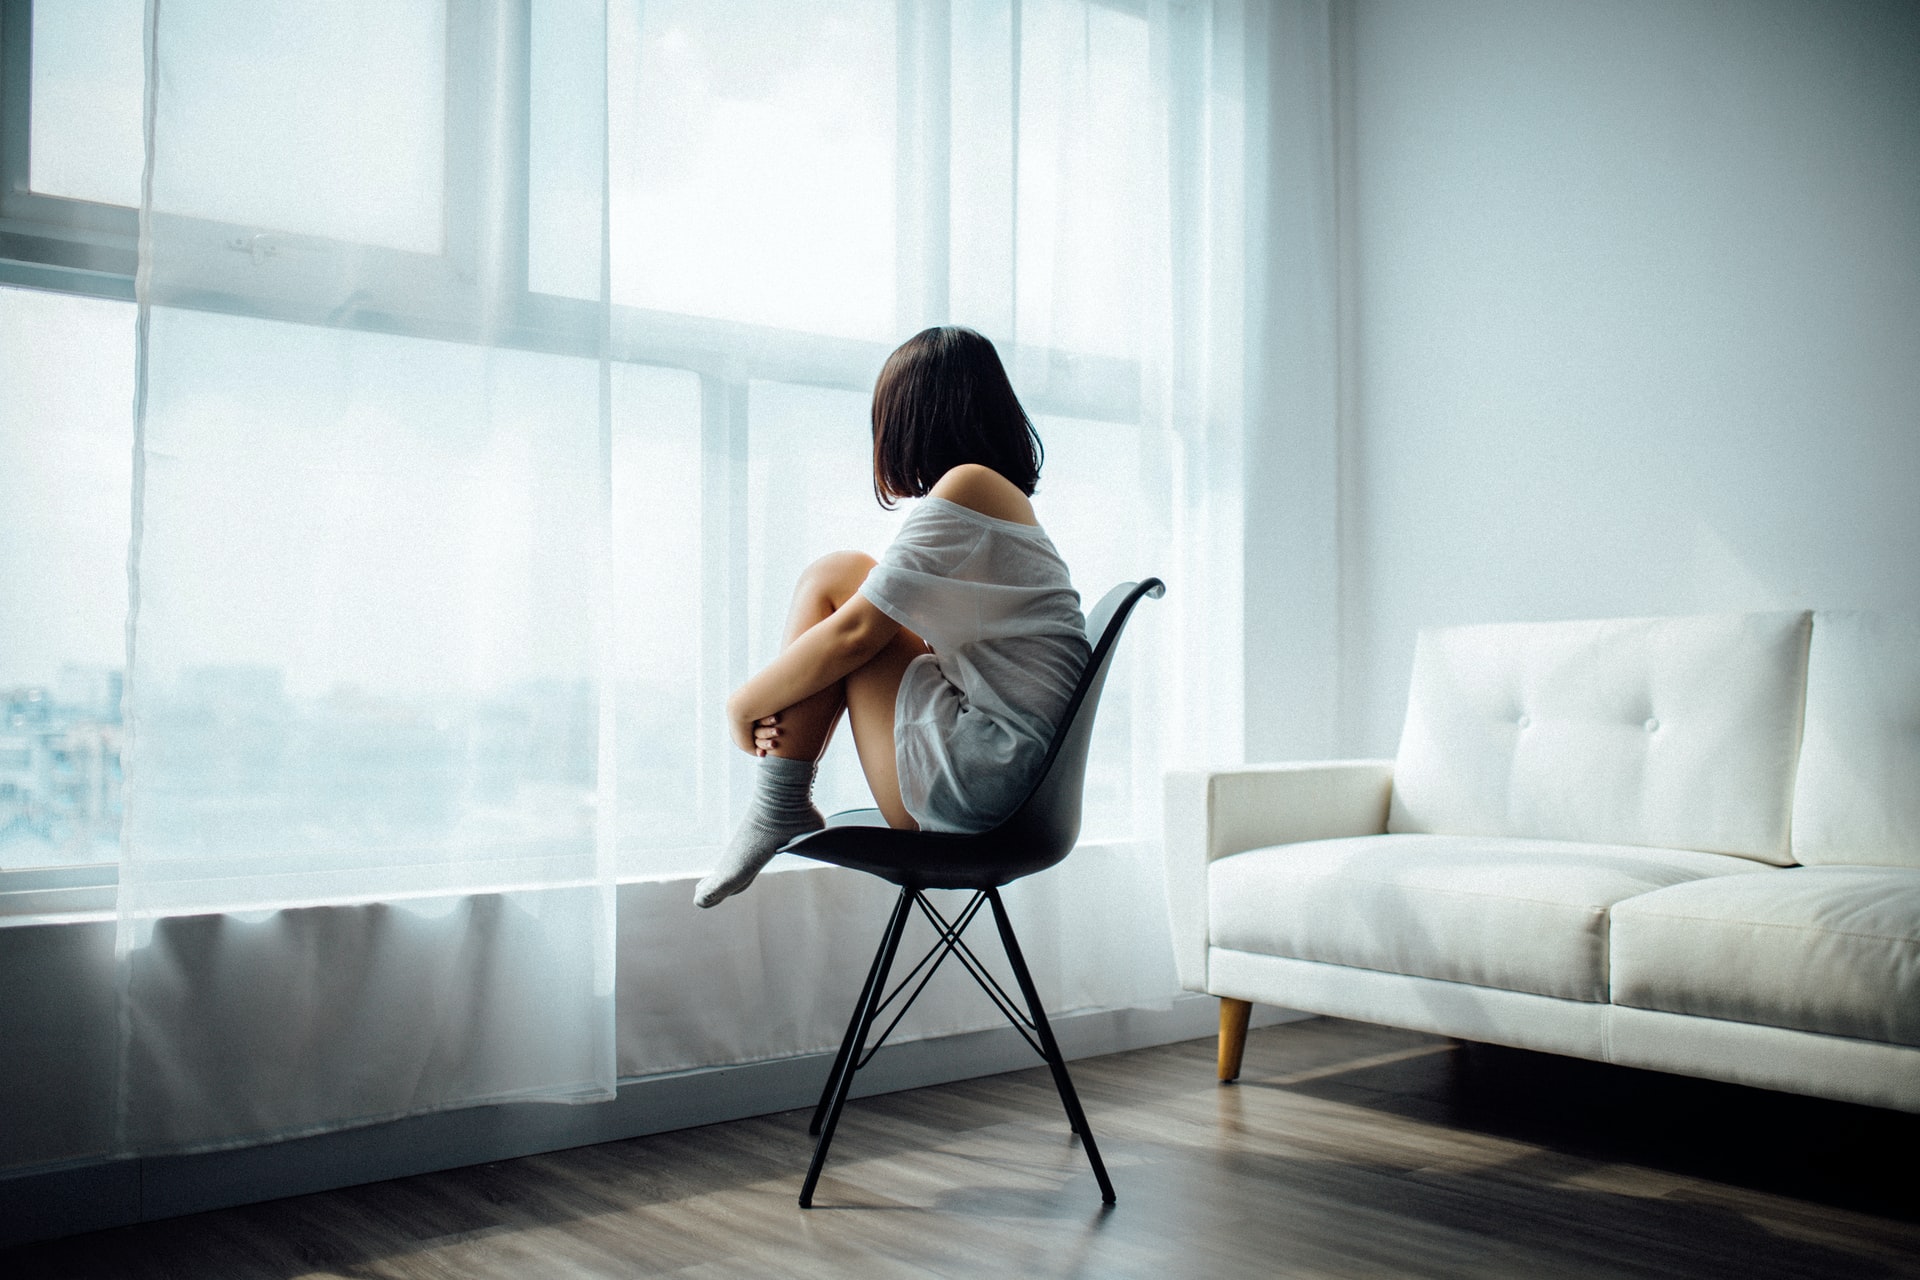 Girl sitting on a chair alone